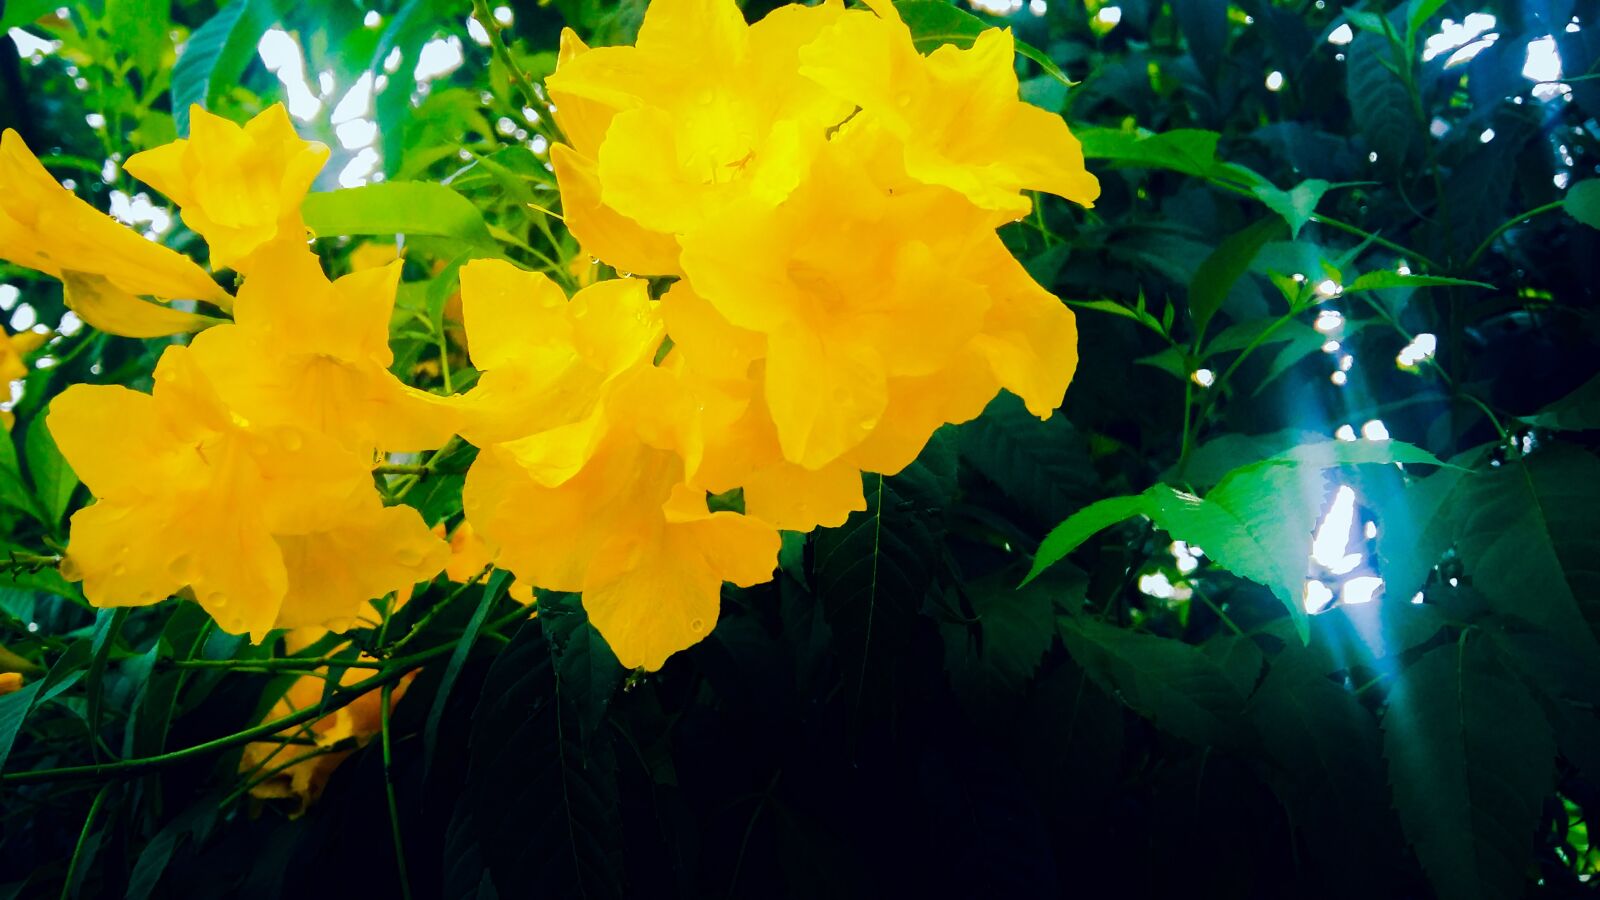 Samsung Galaxy A5 sample photo. Flowers, yellow, nature photography